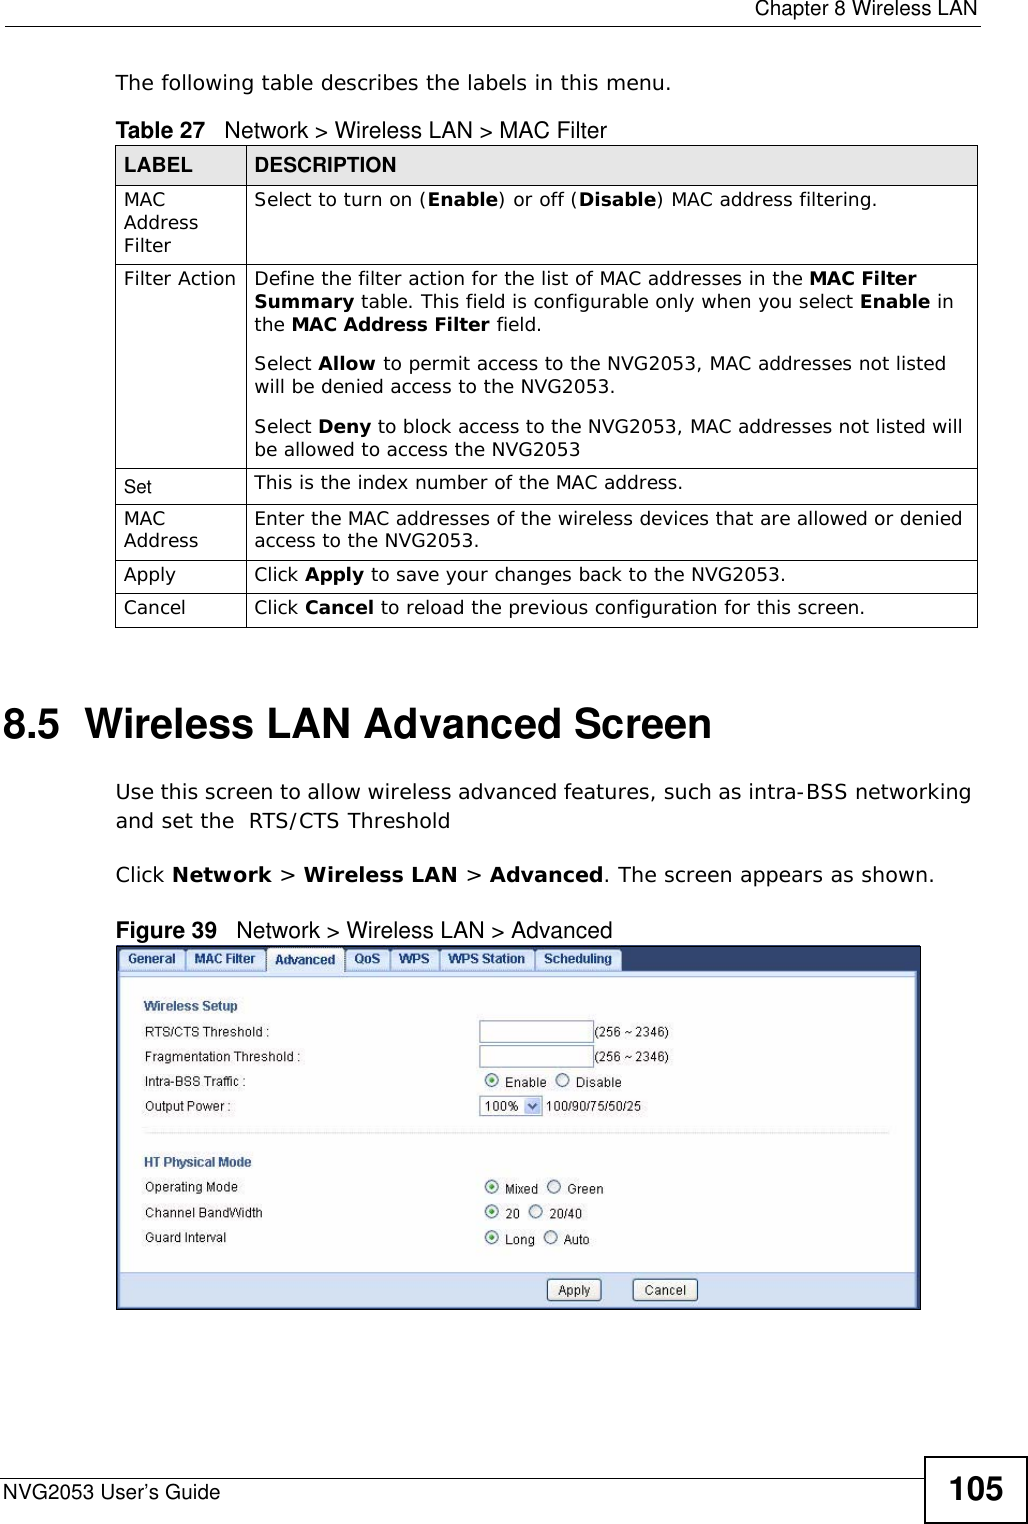  Chapter 8 Wireless LANNVG2053 User’s Guide 105The following table describes the labels in this menu.8.5  Wireless LAN Advanced ScreenUse this screen to allow wireless advanced features, such as intra-BSS networking and set the  RTS/CTS ThresholdClick Network &gt; Wireless LAN &gt; Advanced. The screen appears as shown.Figure 39   Network &gt; Wireless LAN &gt; AdvancedTable 27   Network &gt; Wireless LAN &gt; MAC FilterLABEL DESCRIPTIONMAC Address Filter Select to turn on (Enable) or off (Disable) MAC address filtering.Filter Action Define the filter action for the list of MAC addresses in the MAC Filter Summary table. This field is configurable only when you select Enable in the MAC Address Filter field.Select Allow to permit access to the NVG2053, MAC addresses not listed will be denied access to the NVG2053. Select Deny to block access to the NVG2053, MAC addresses not listed will be allowed to access the NVG2053 Set This is the index number of the MAC address.MAC Address Enter the MAC addresses of the wireless devices that are allowed or denied access to the NVG2053.Apply Click Apply to save your changes back to the NVG2053.Cancel Click Cancel to reload the previous configuration for this screen.